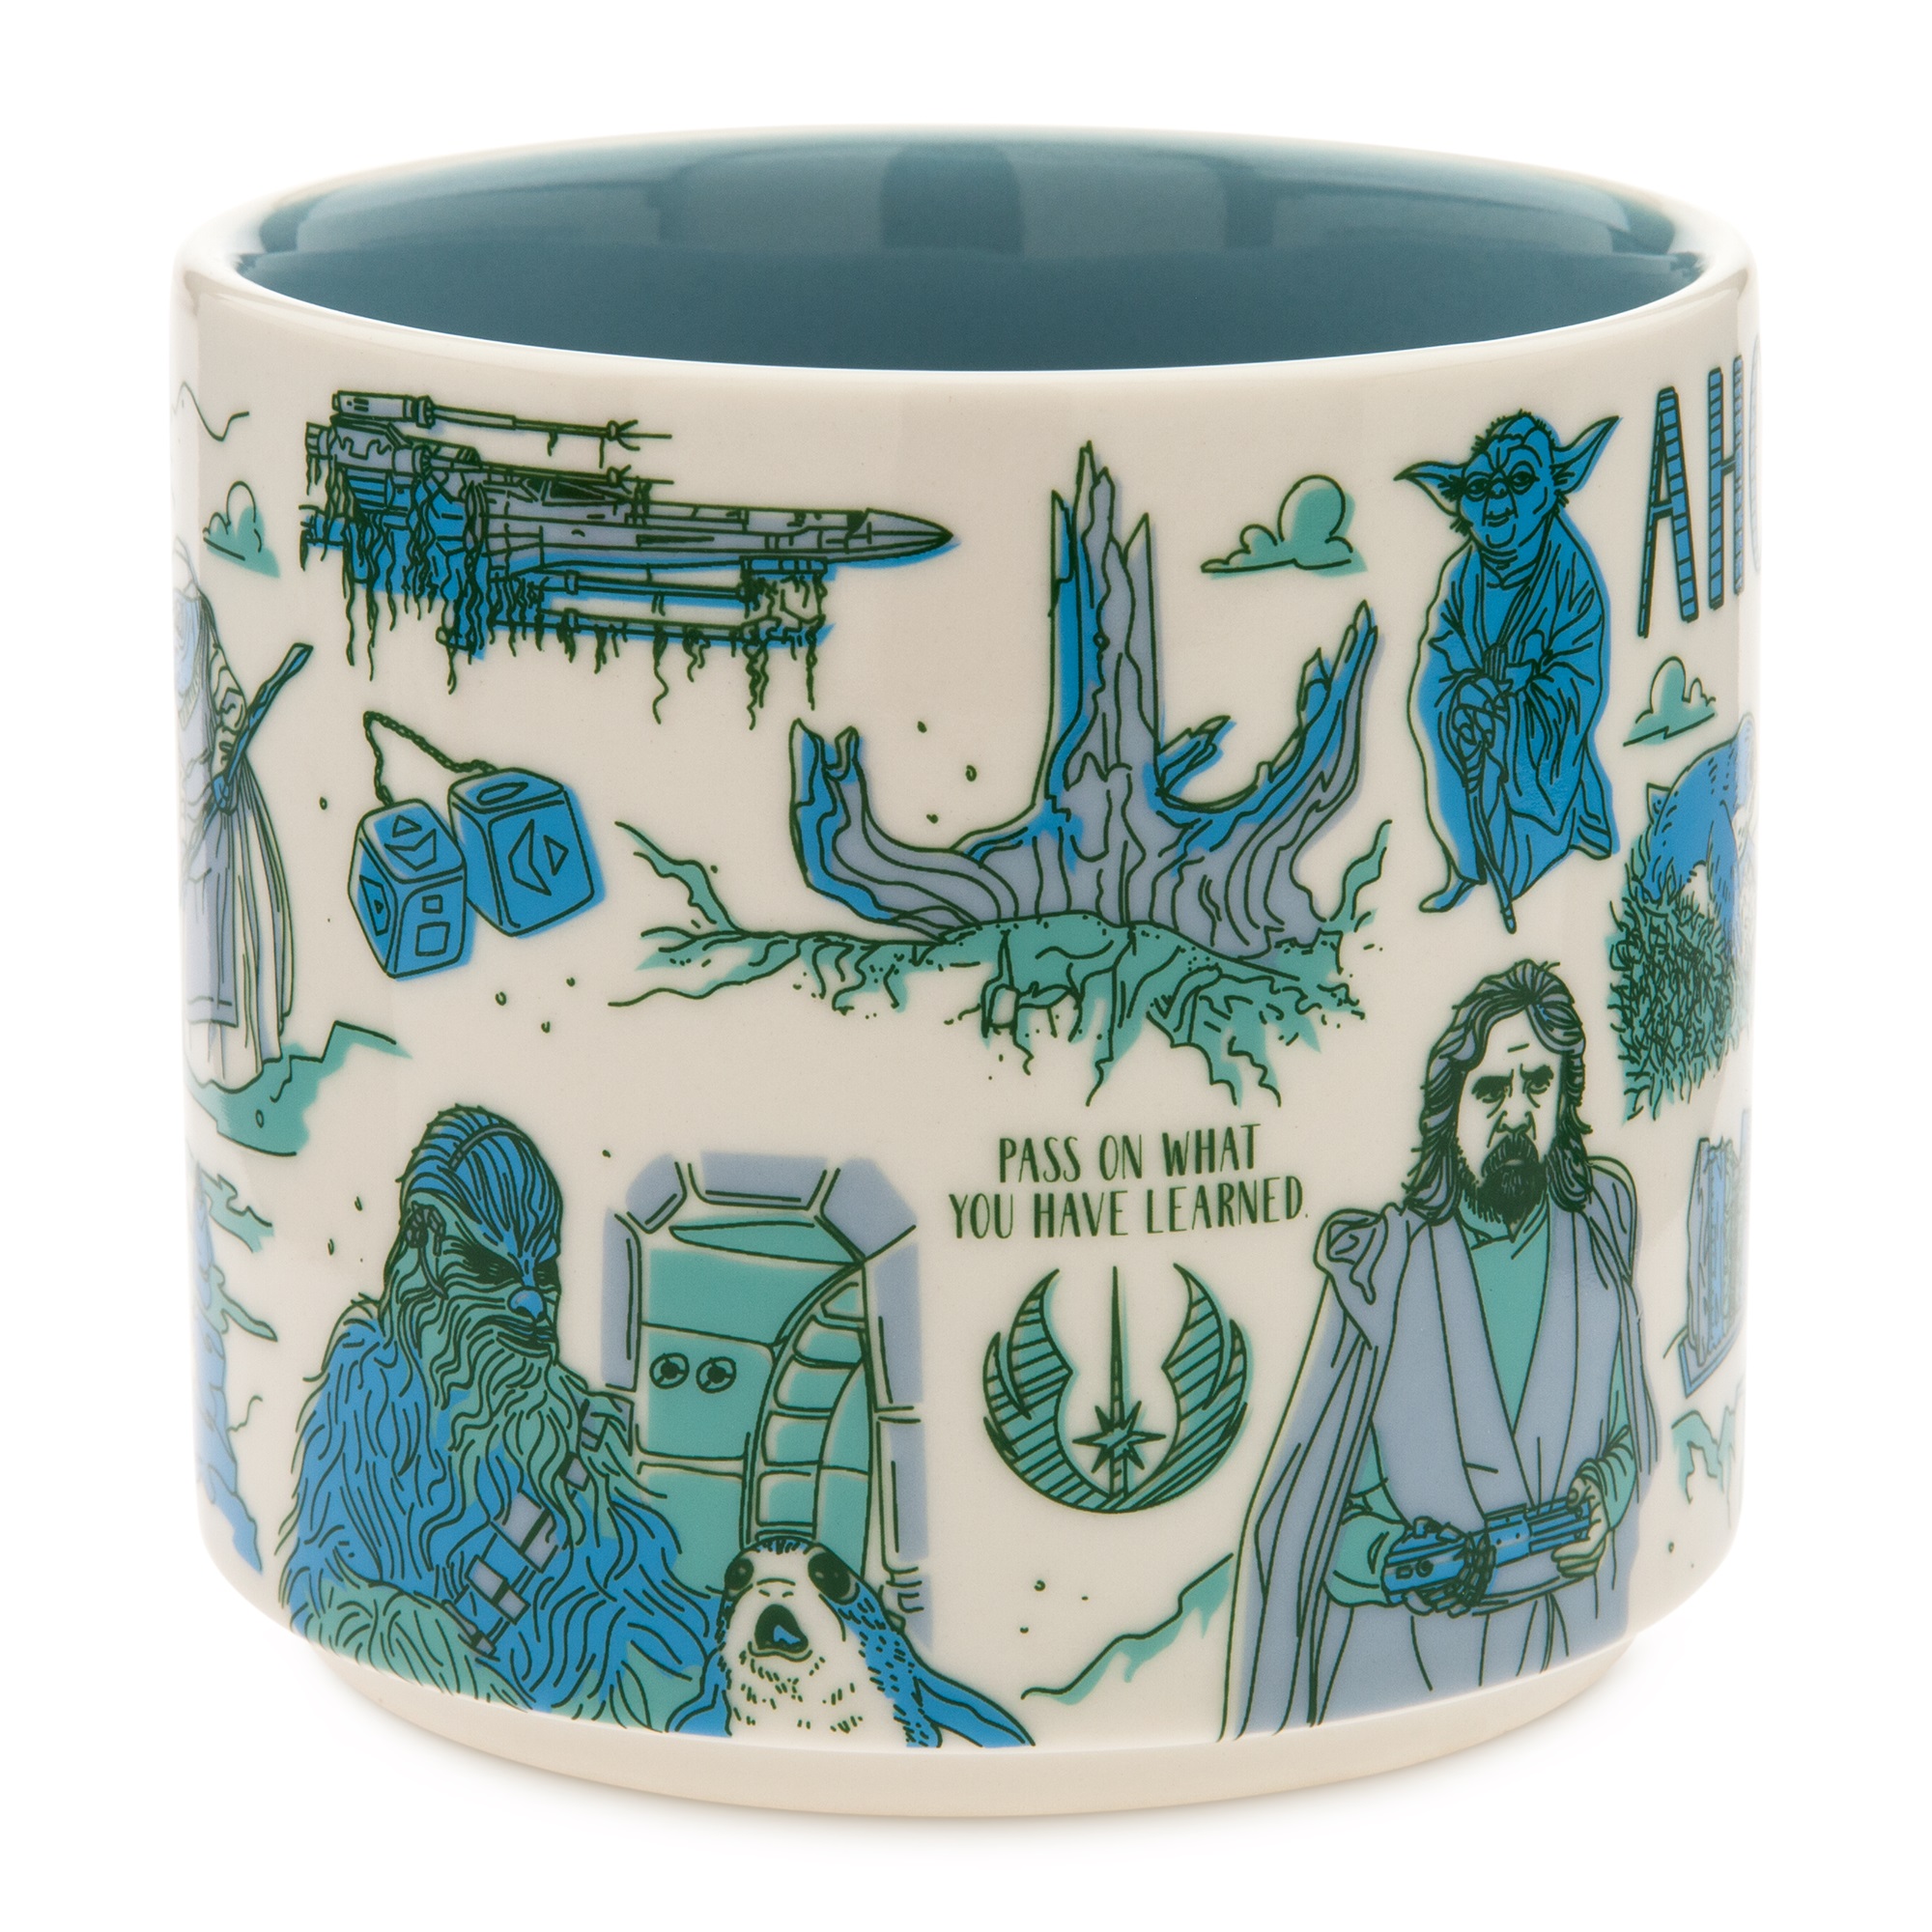 New STAR WARS Starbucks 'Been There' Mugs Commemorate Your